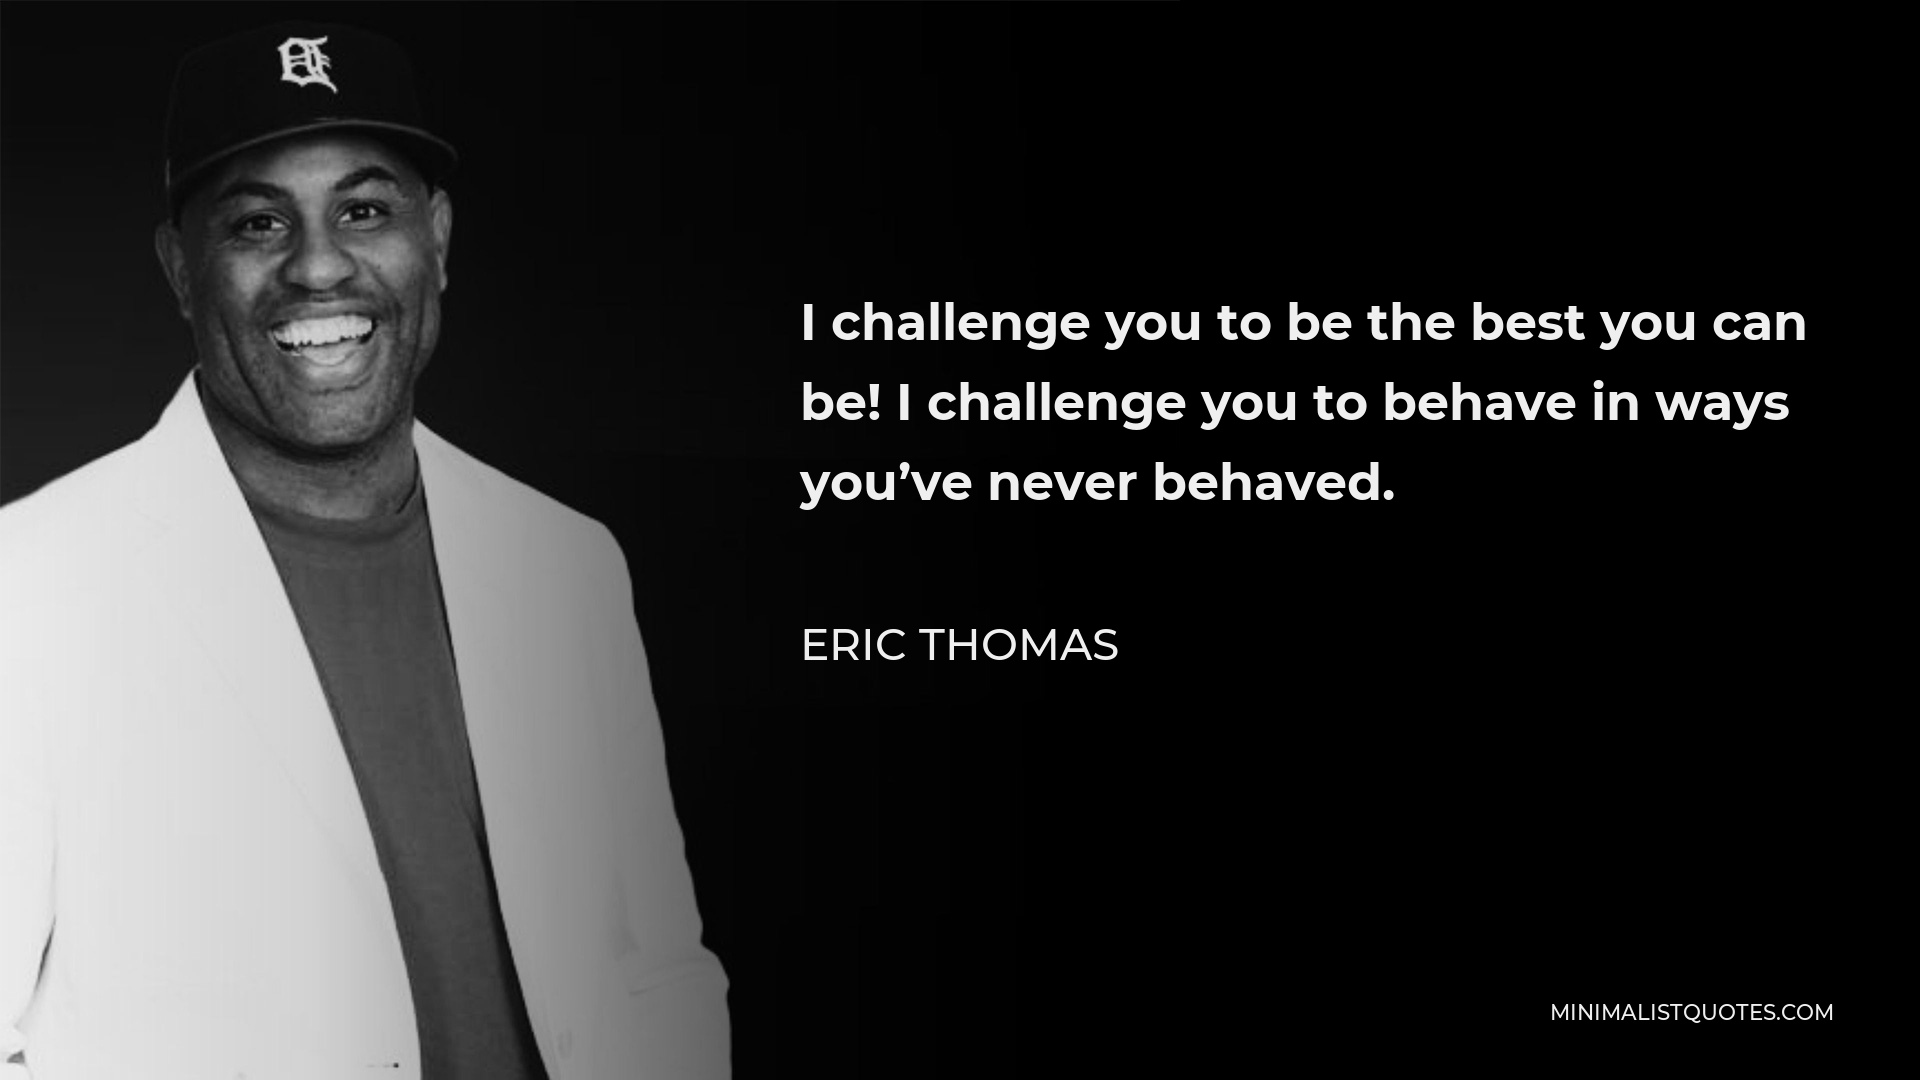 Eric Thomas Quote - I challenge you to be the best you can be! I challenge you to behave in ways you’ve never behaved.